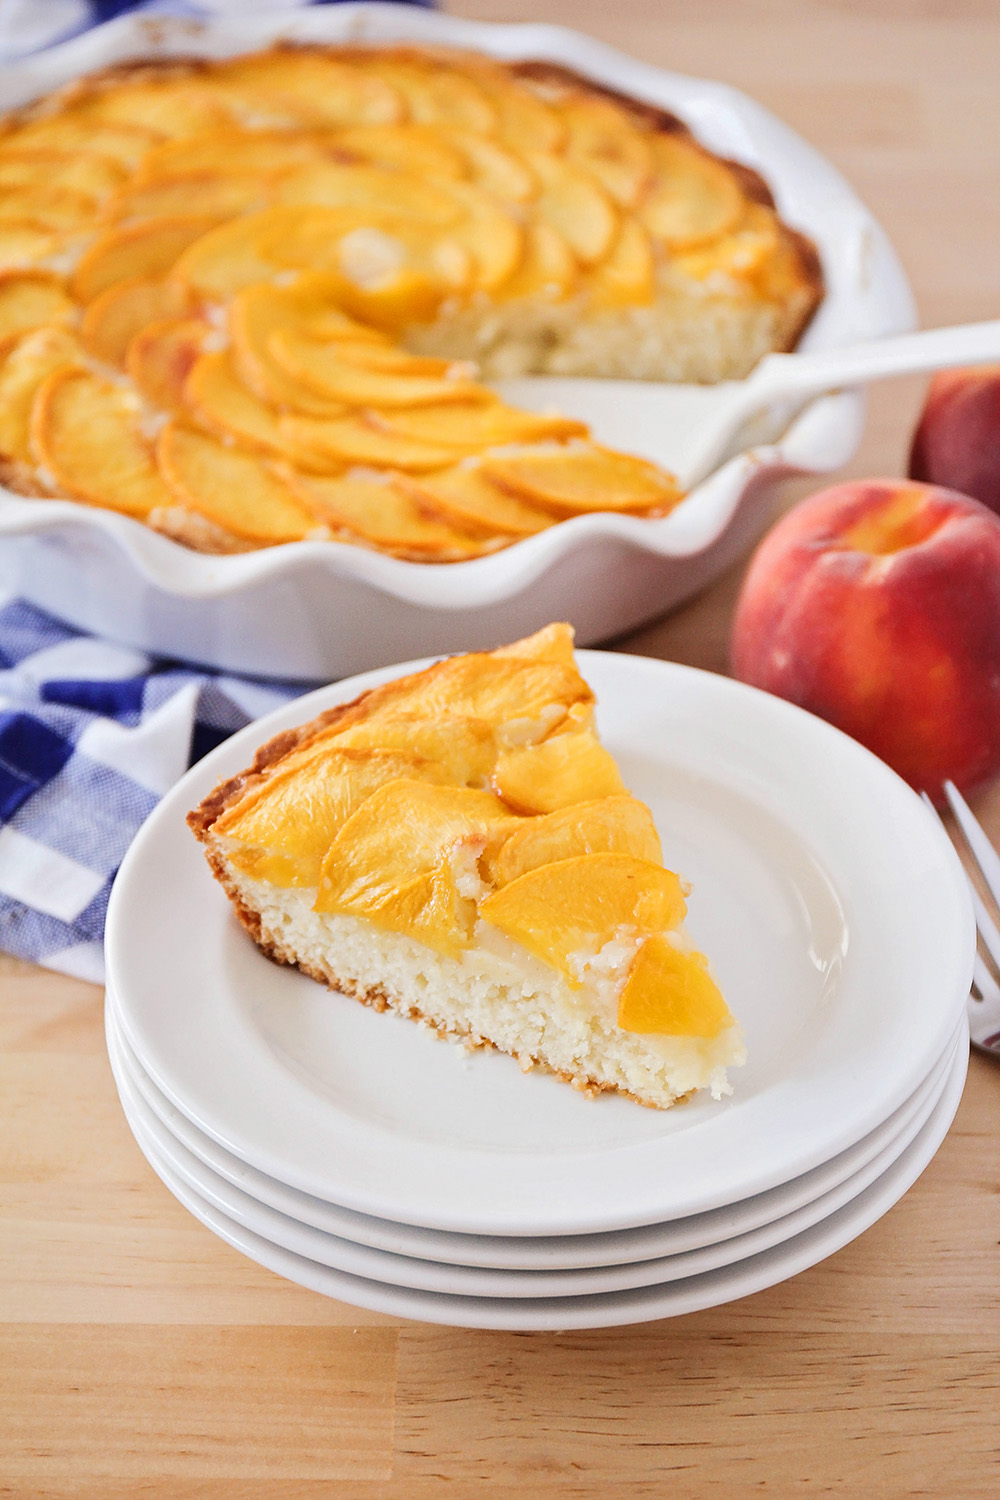 This sweet and delicious peach buttermilk cake is the perfect way to showcase that gorgeous fresh summer fruit!